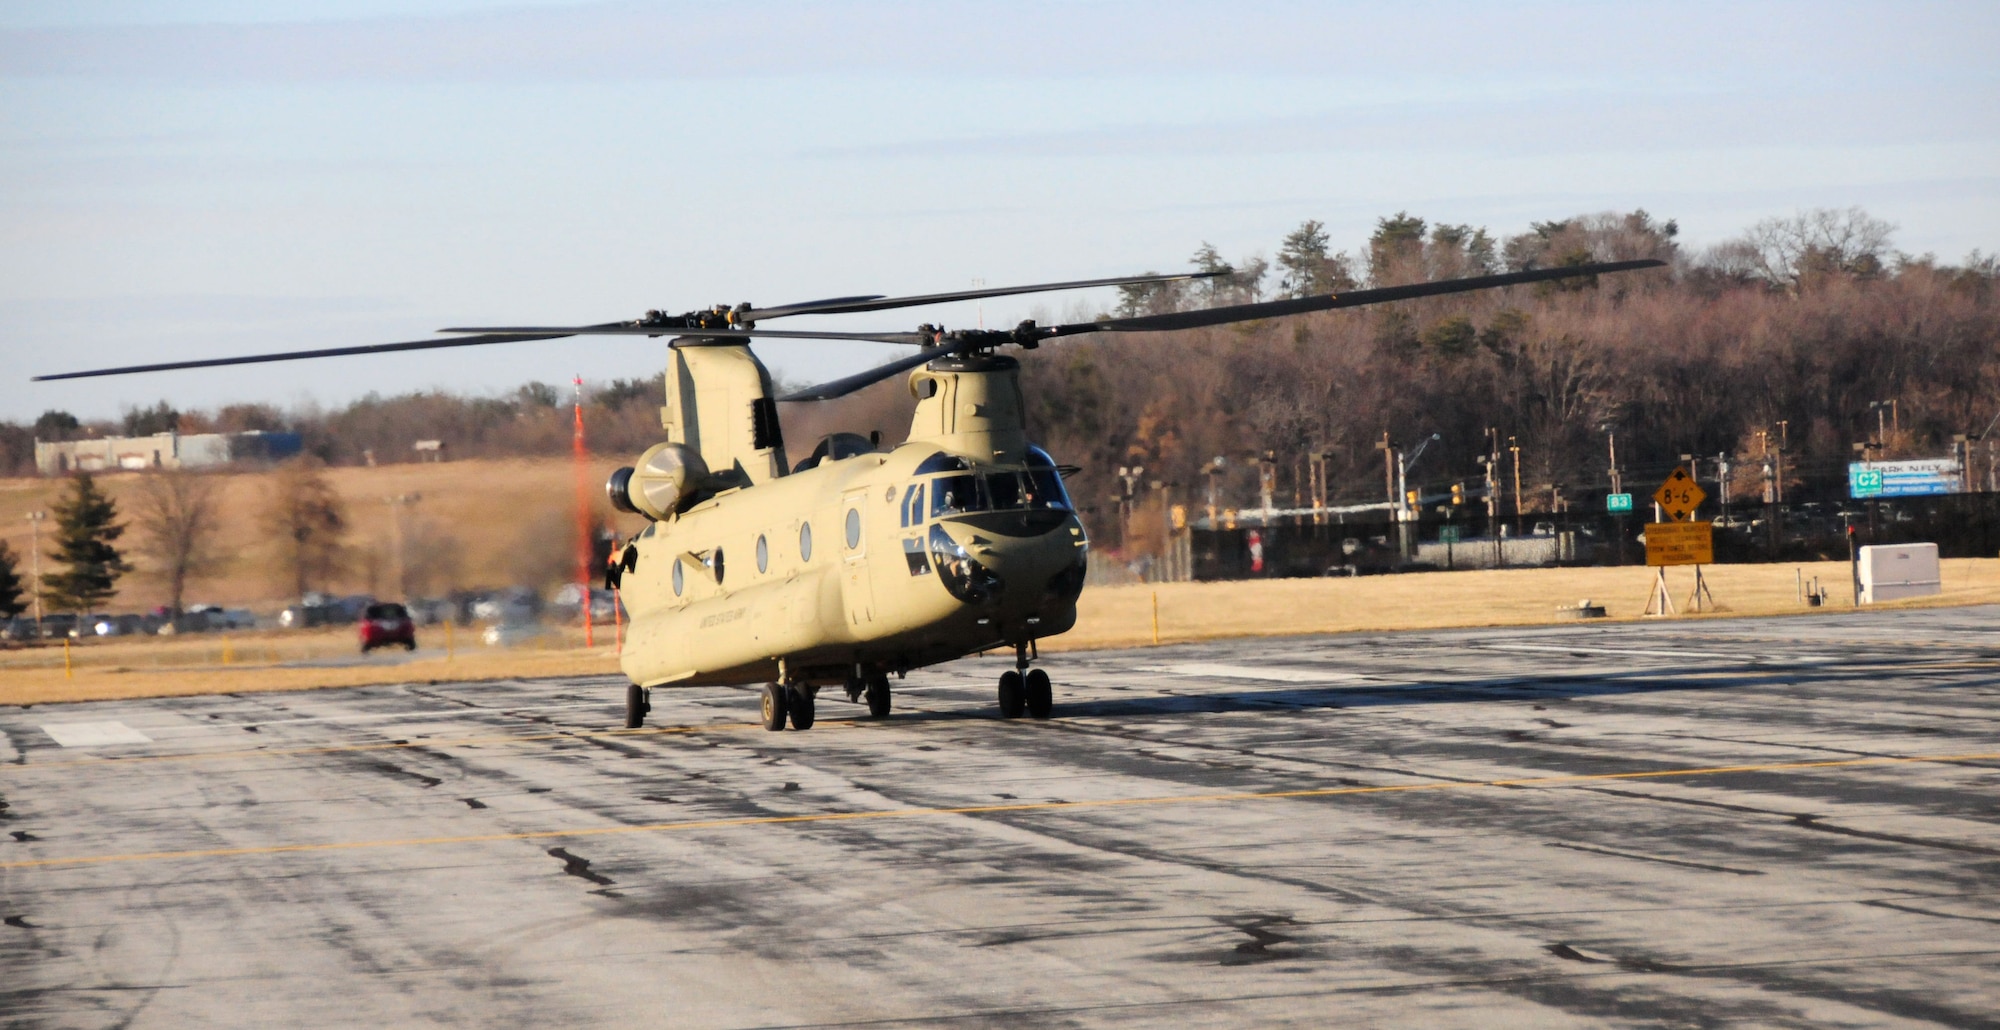 One of two Connecticut Army National Guard CH-47 Chinooks lands at a general aviation facility in Baltimore to pick up approximately 25 Connecticut Air National Guardsmen with the 103rd Security Forces Squadron at Bradley Air National Guard Base, East Granby, Conn., as they return home from Afghanistan Jan. 30, 2012. (U.S. Air Force photo by Tech. Sgt. Joshua Mead)